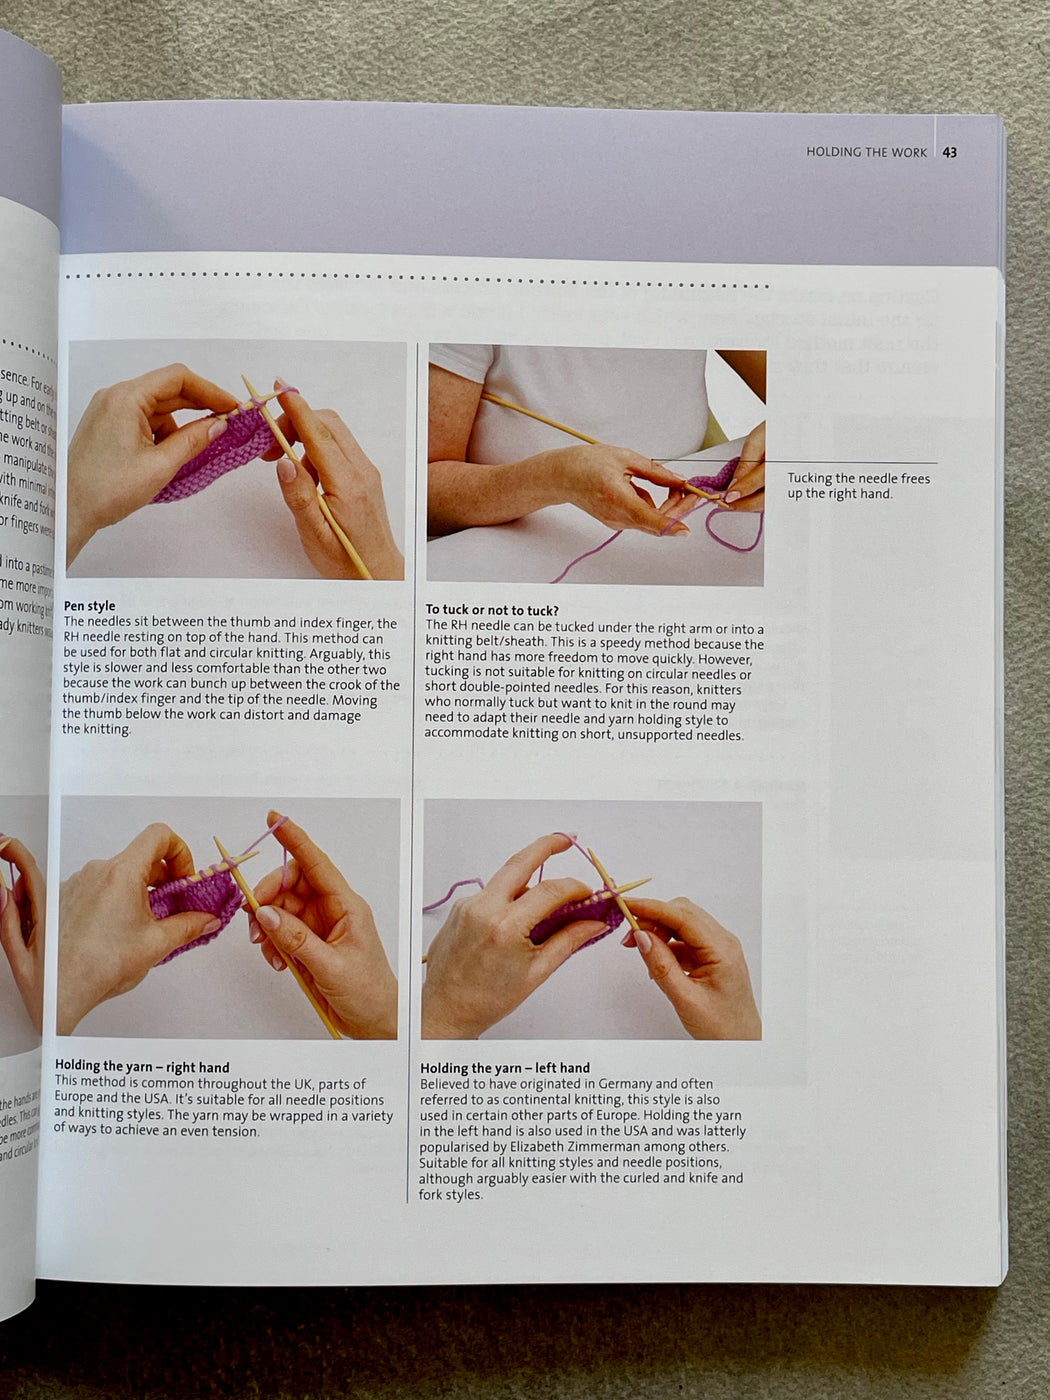 "How to Knit" by Debbie Tomkies